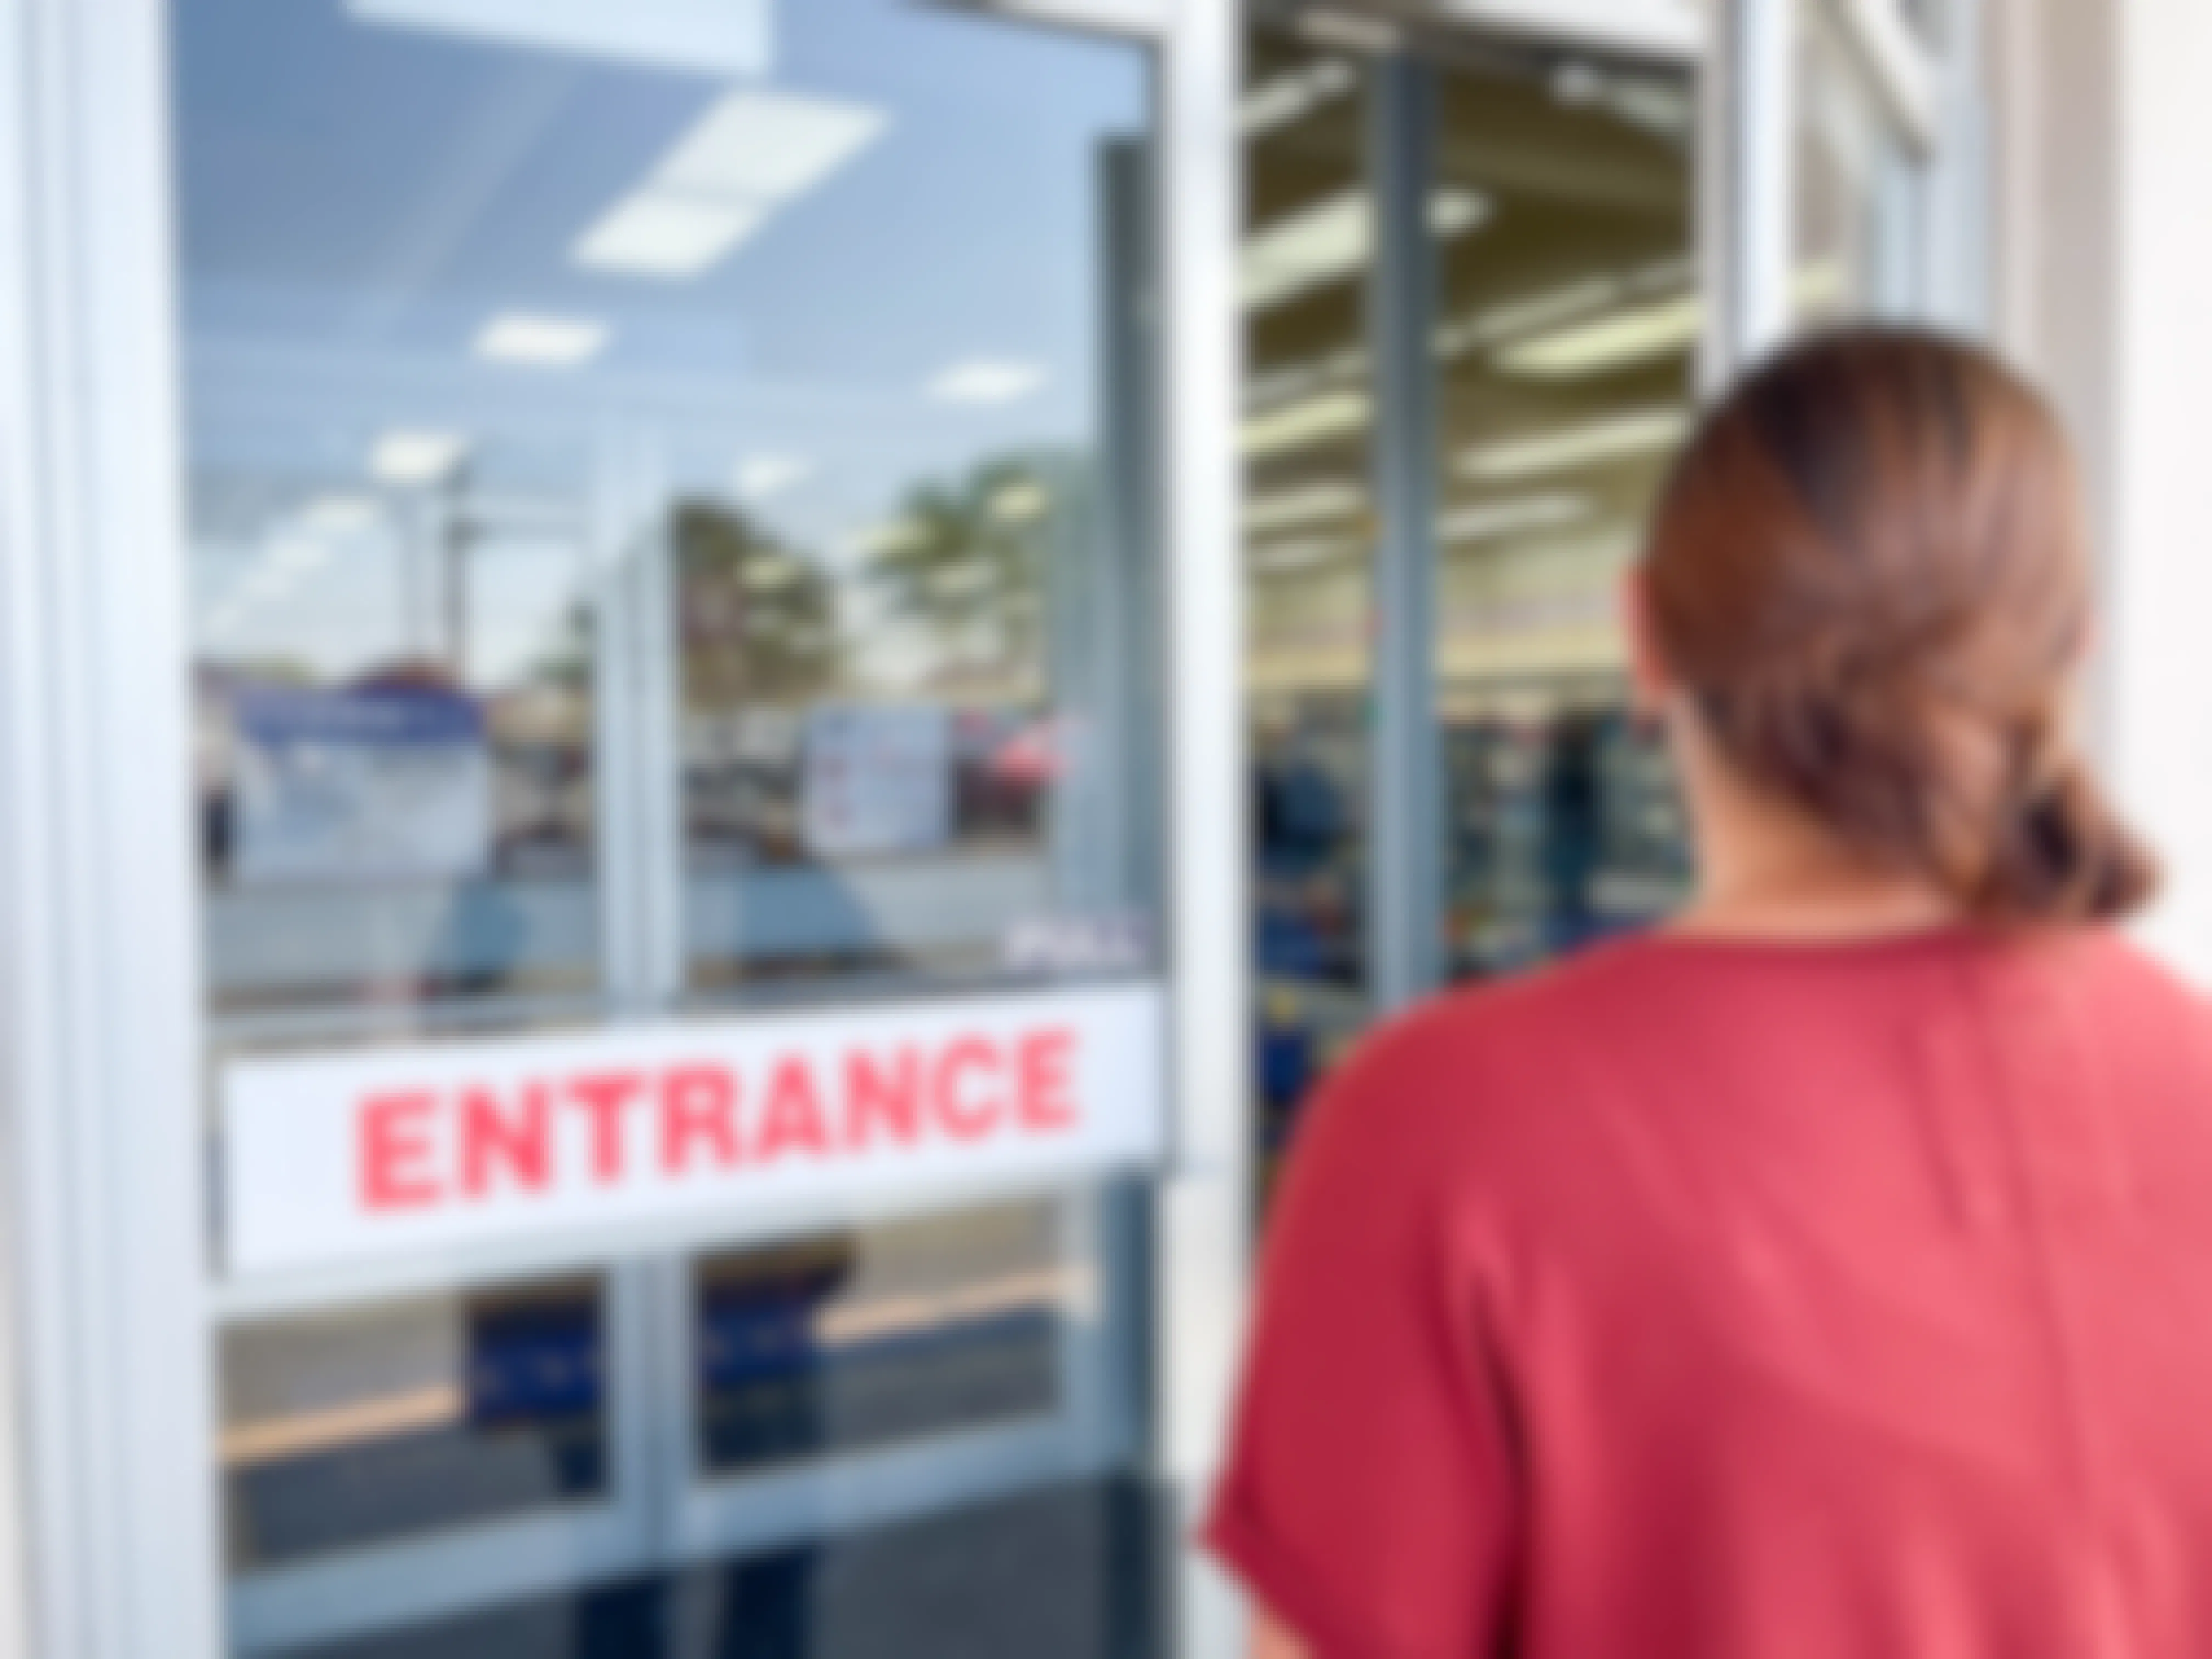 a woman going into entrance of goodwill